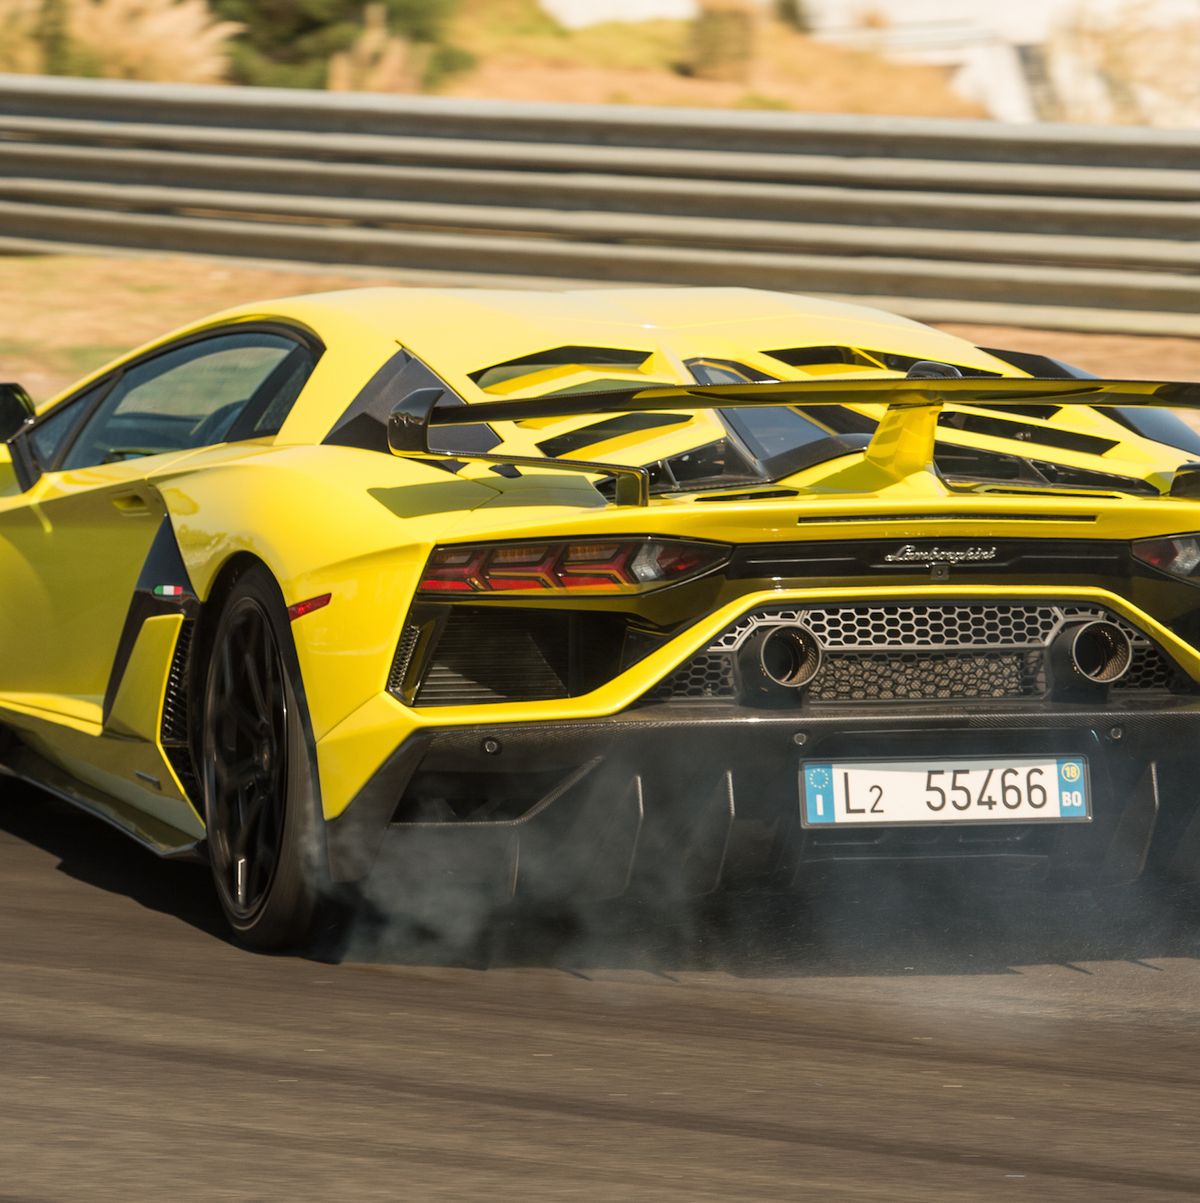 The Lamborghini Aventador SVJ Is a 770HP Terror - Test Drive and Review